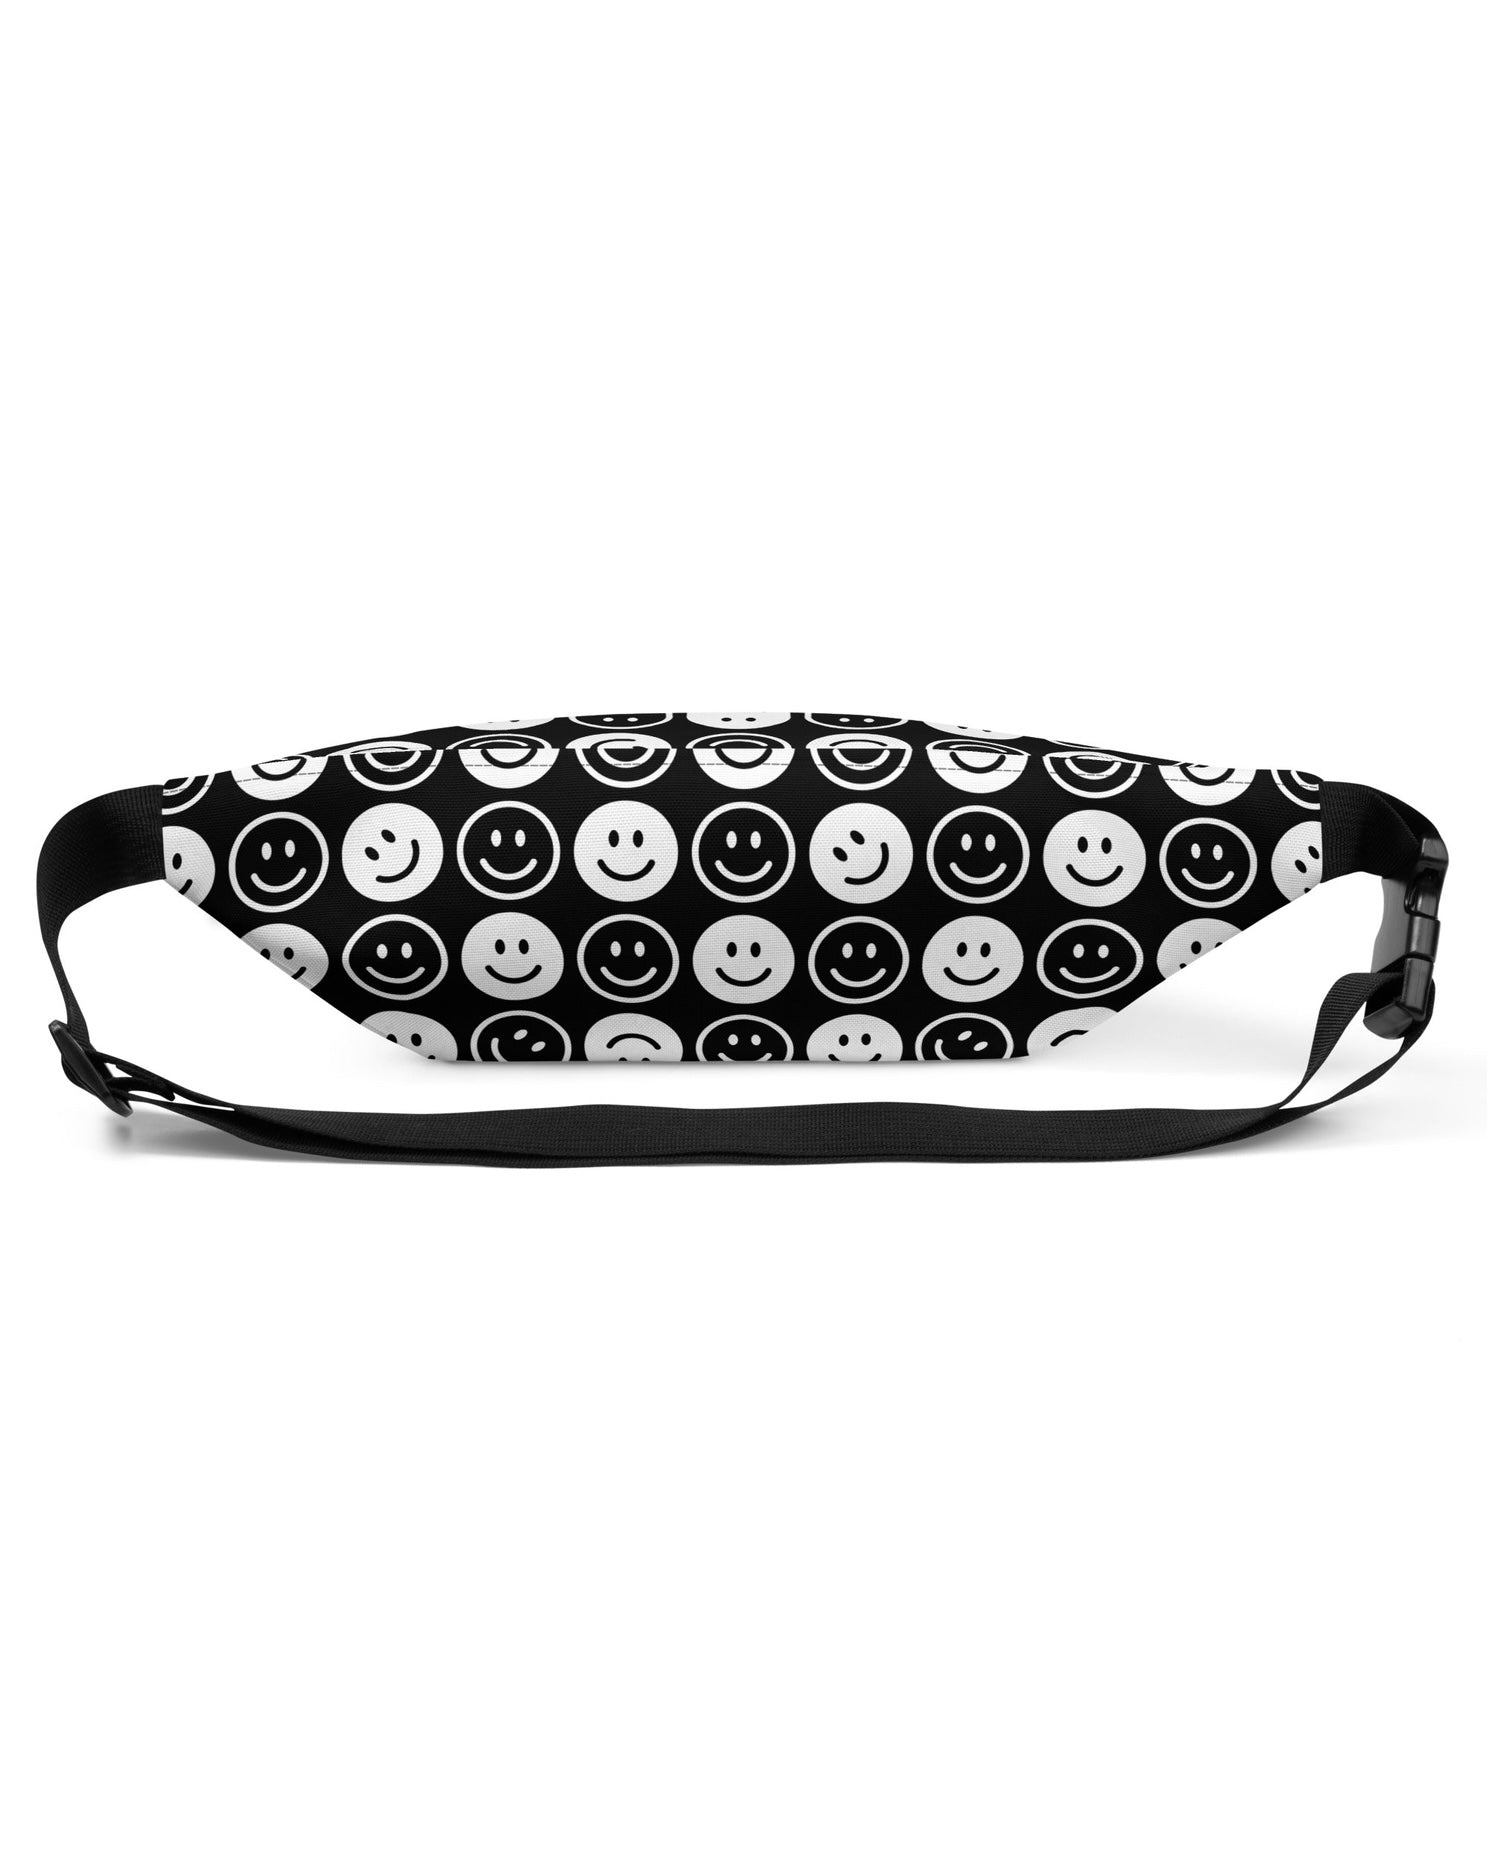 All Smiles Fanny Pack, Fanny Pack, - One Stop Rave